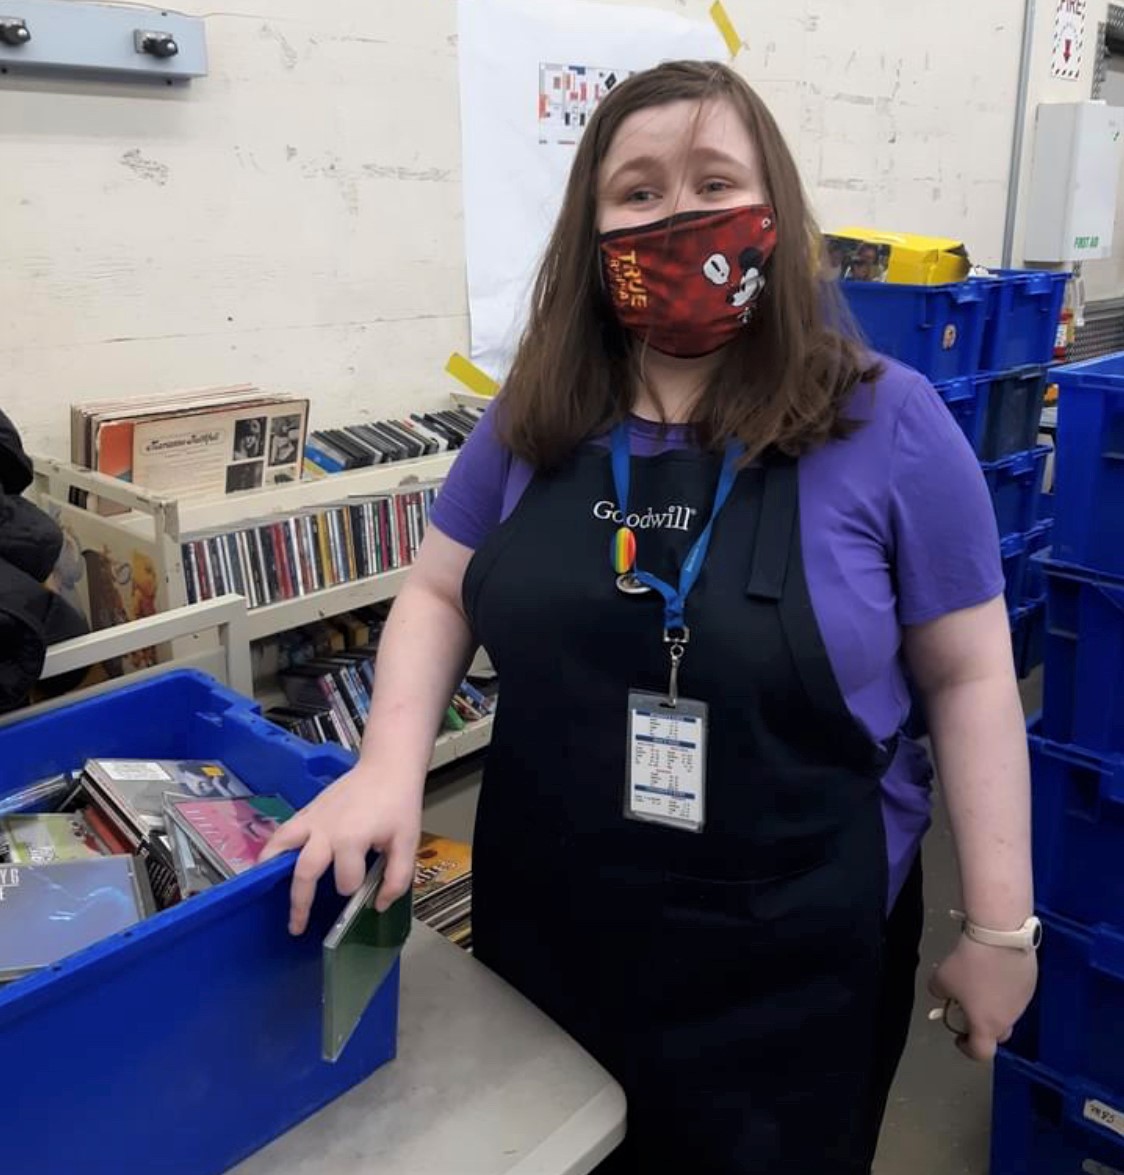 Image: woman with brown hair, bergundy mask, purple shirt, and black Goodwill apron stands in front of shelves of DVD's.